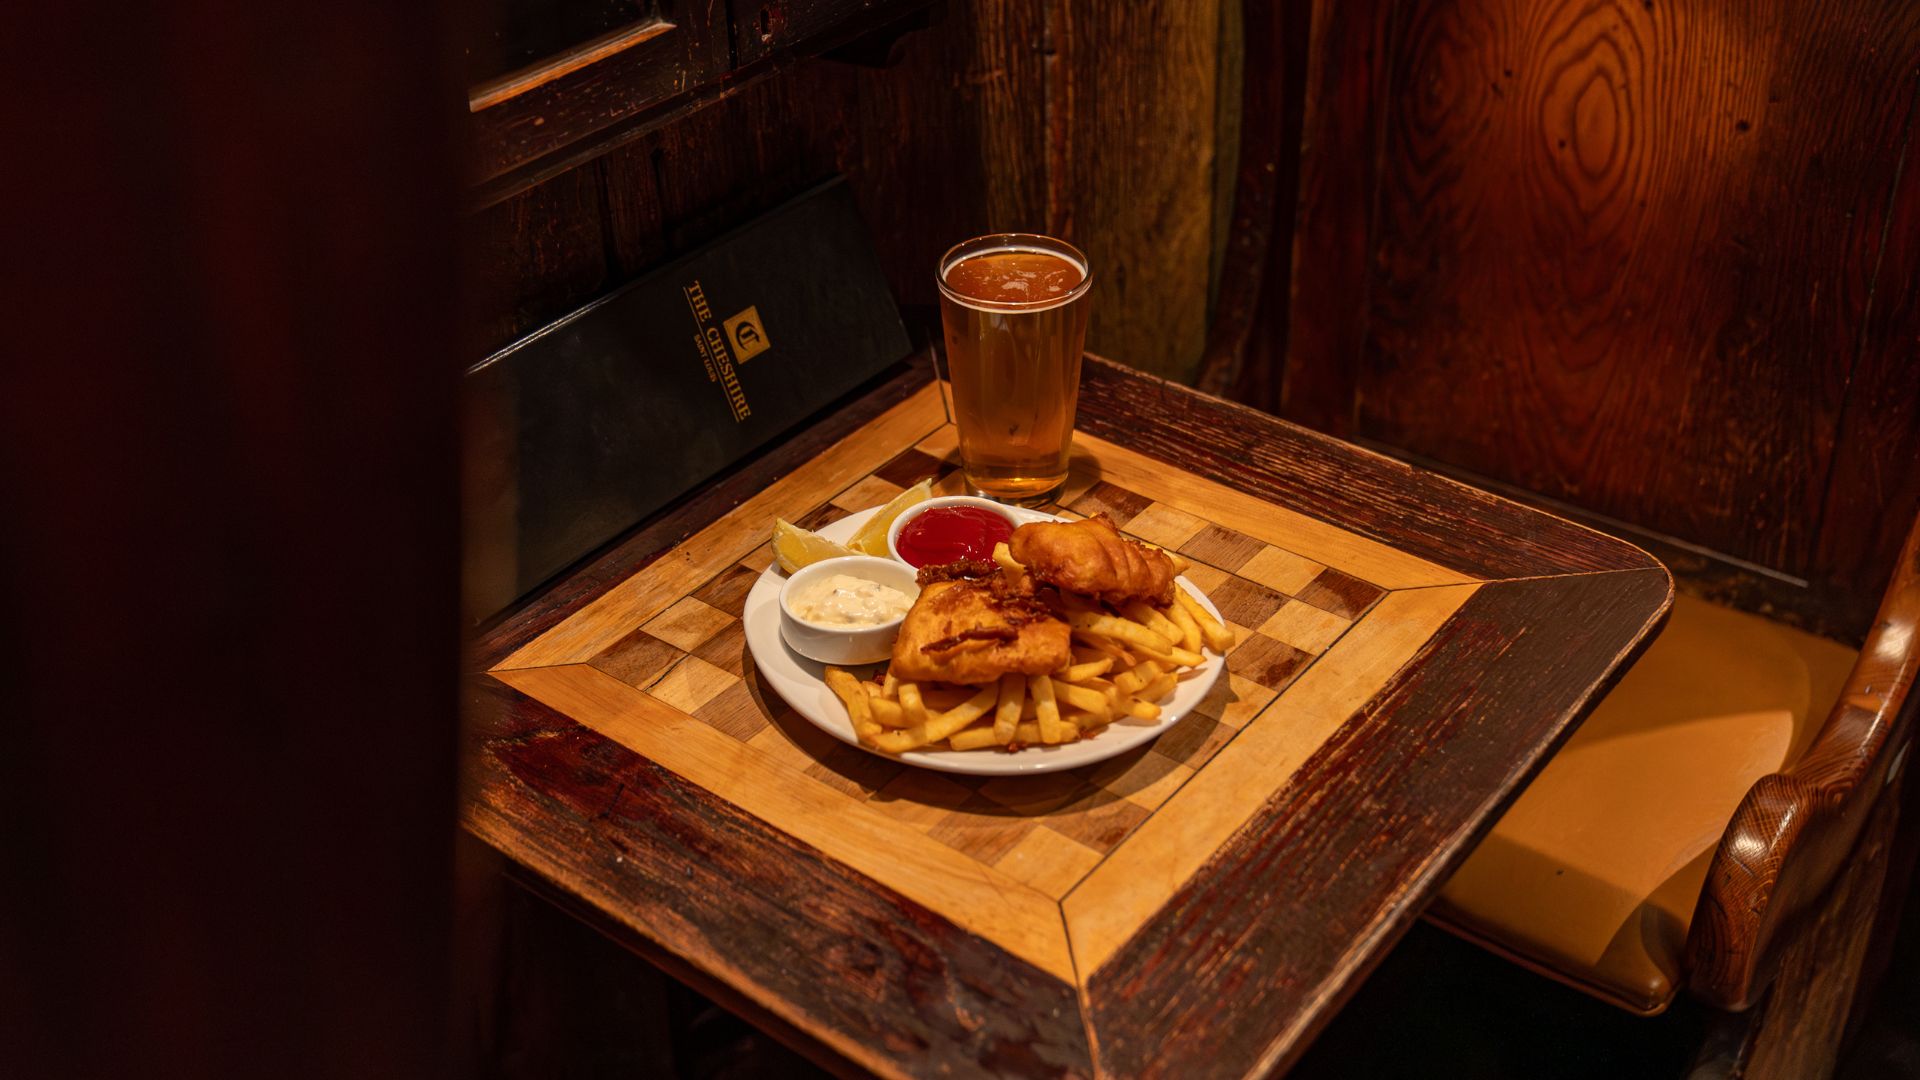 Fox and Hounds is a cozy English pub in Clayton that serves fish and chips and beer.